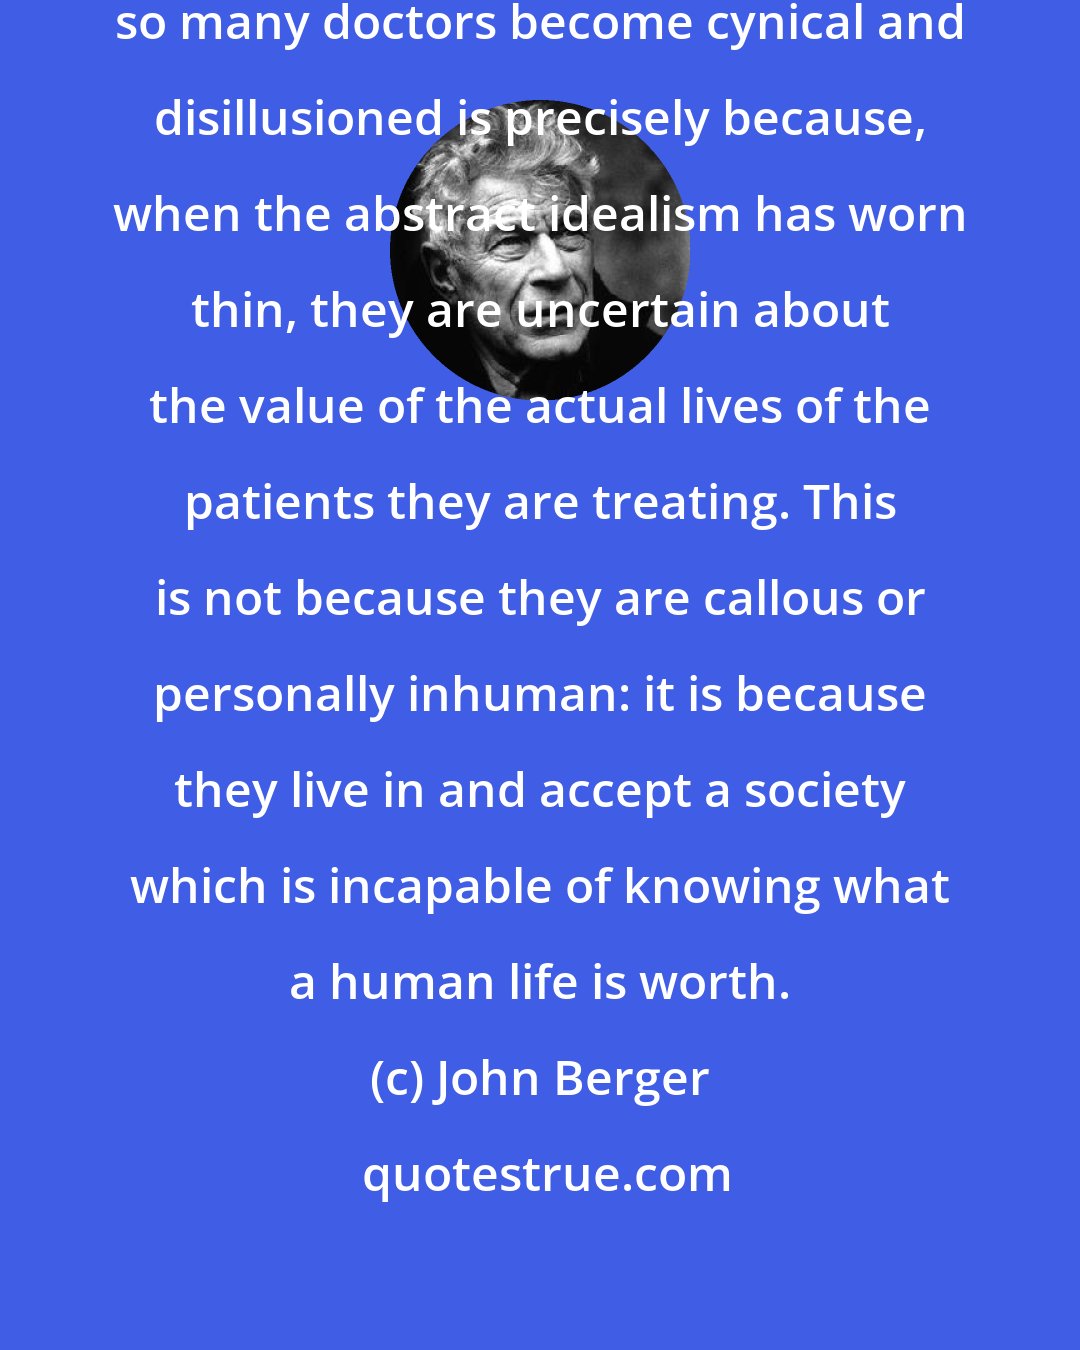 John Berger: One of the fundamental reasons why so many doctors become cynical and disillusioned is precisely because, when the abstract idealism has worn thin, they are uncertain about the value of the actual lives of the patients they are treating. This is not because they are callous or personally inhuman: it is because they live in and accept a society which is incapable of knowing what a human life is worth.